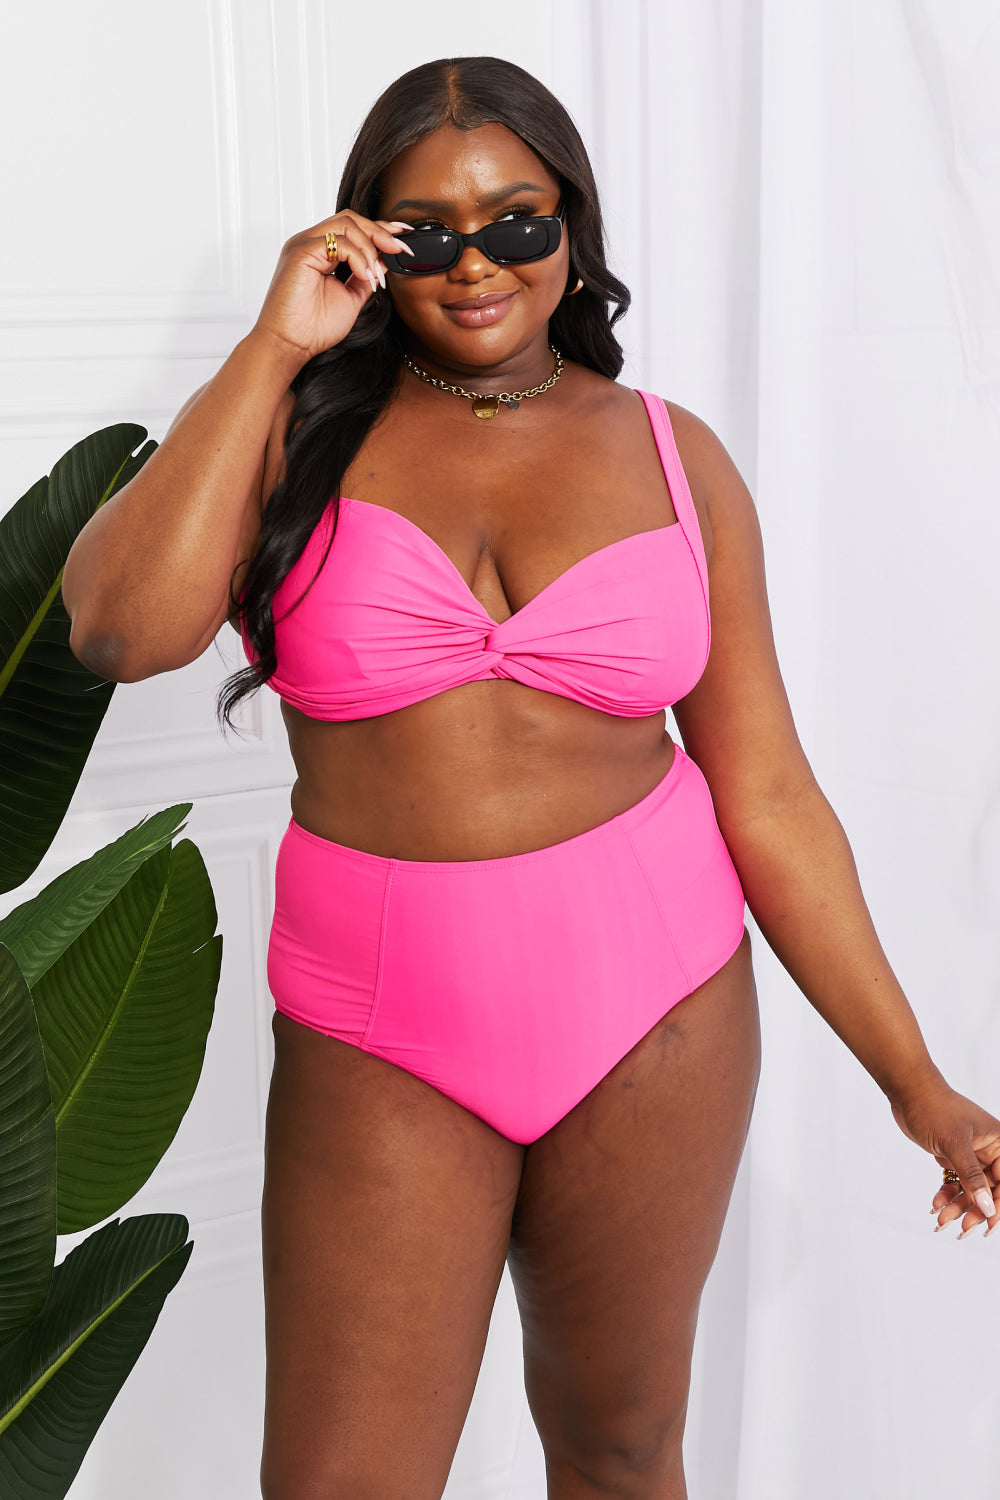 Get ready for a splash with Take A Dip Twist High-Rise Bikini in Pink! This flirty twist-front top and flattering high-rise bottoms are sure to satisfy all your summer cravings. With customizable removable pads, this suit will quickly become your go-to for beach days. Note: Runs small, order one size up. If between sizes, please size up. Models are wearing sizes S and 2XL.